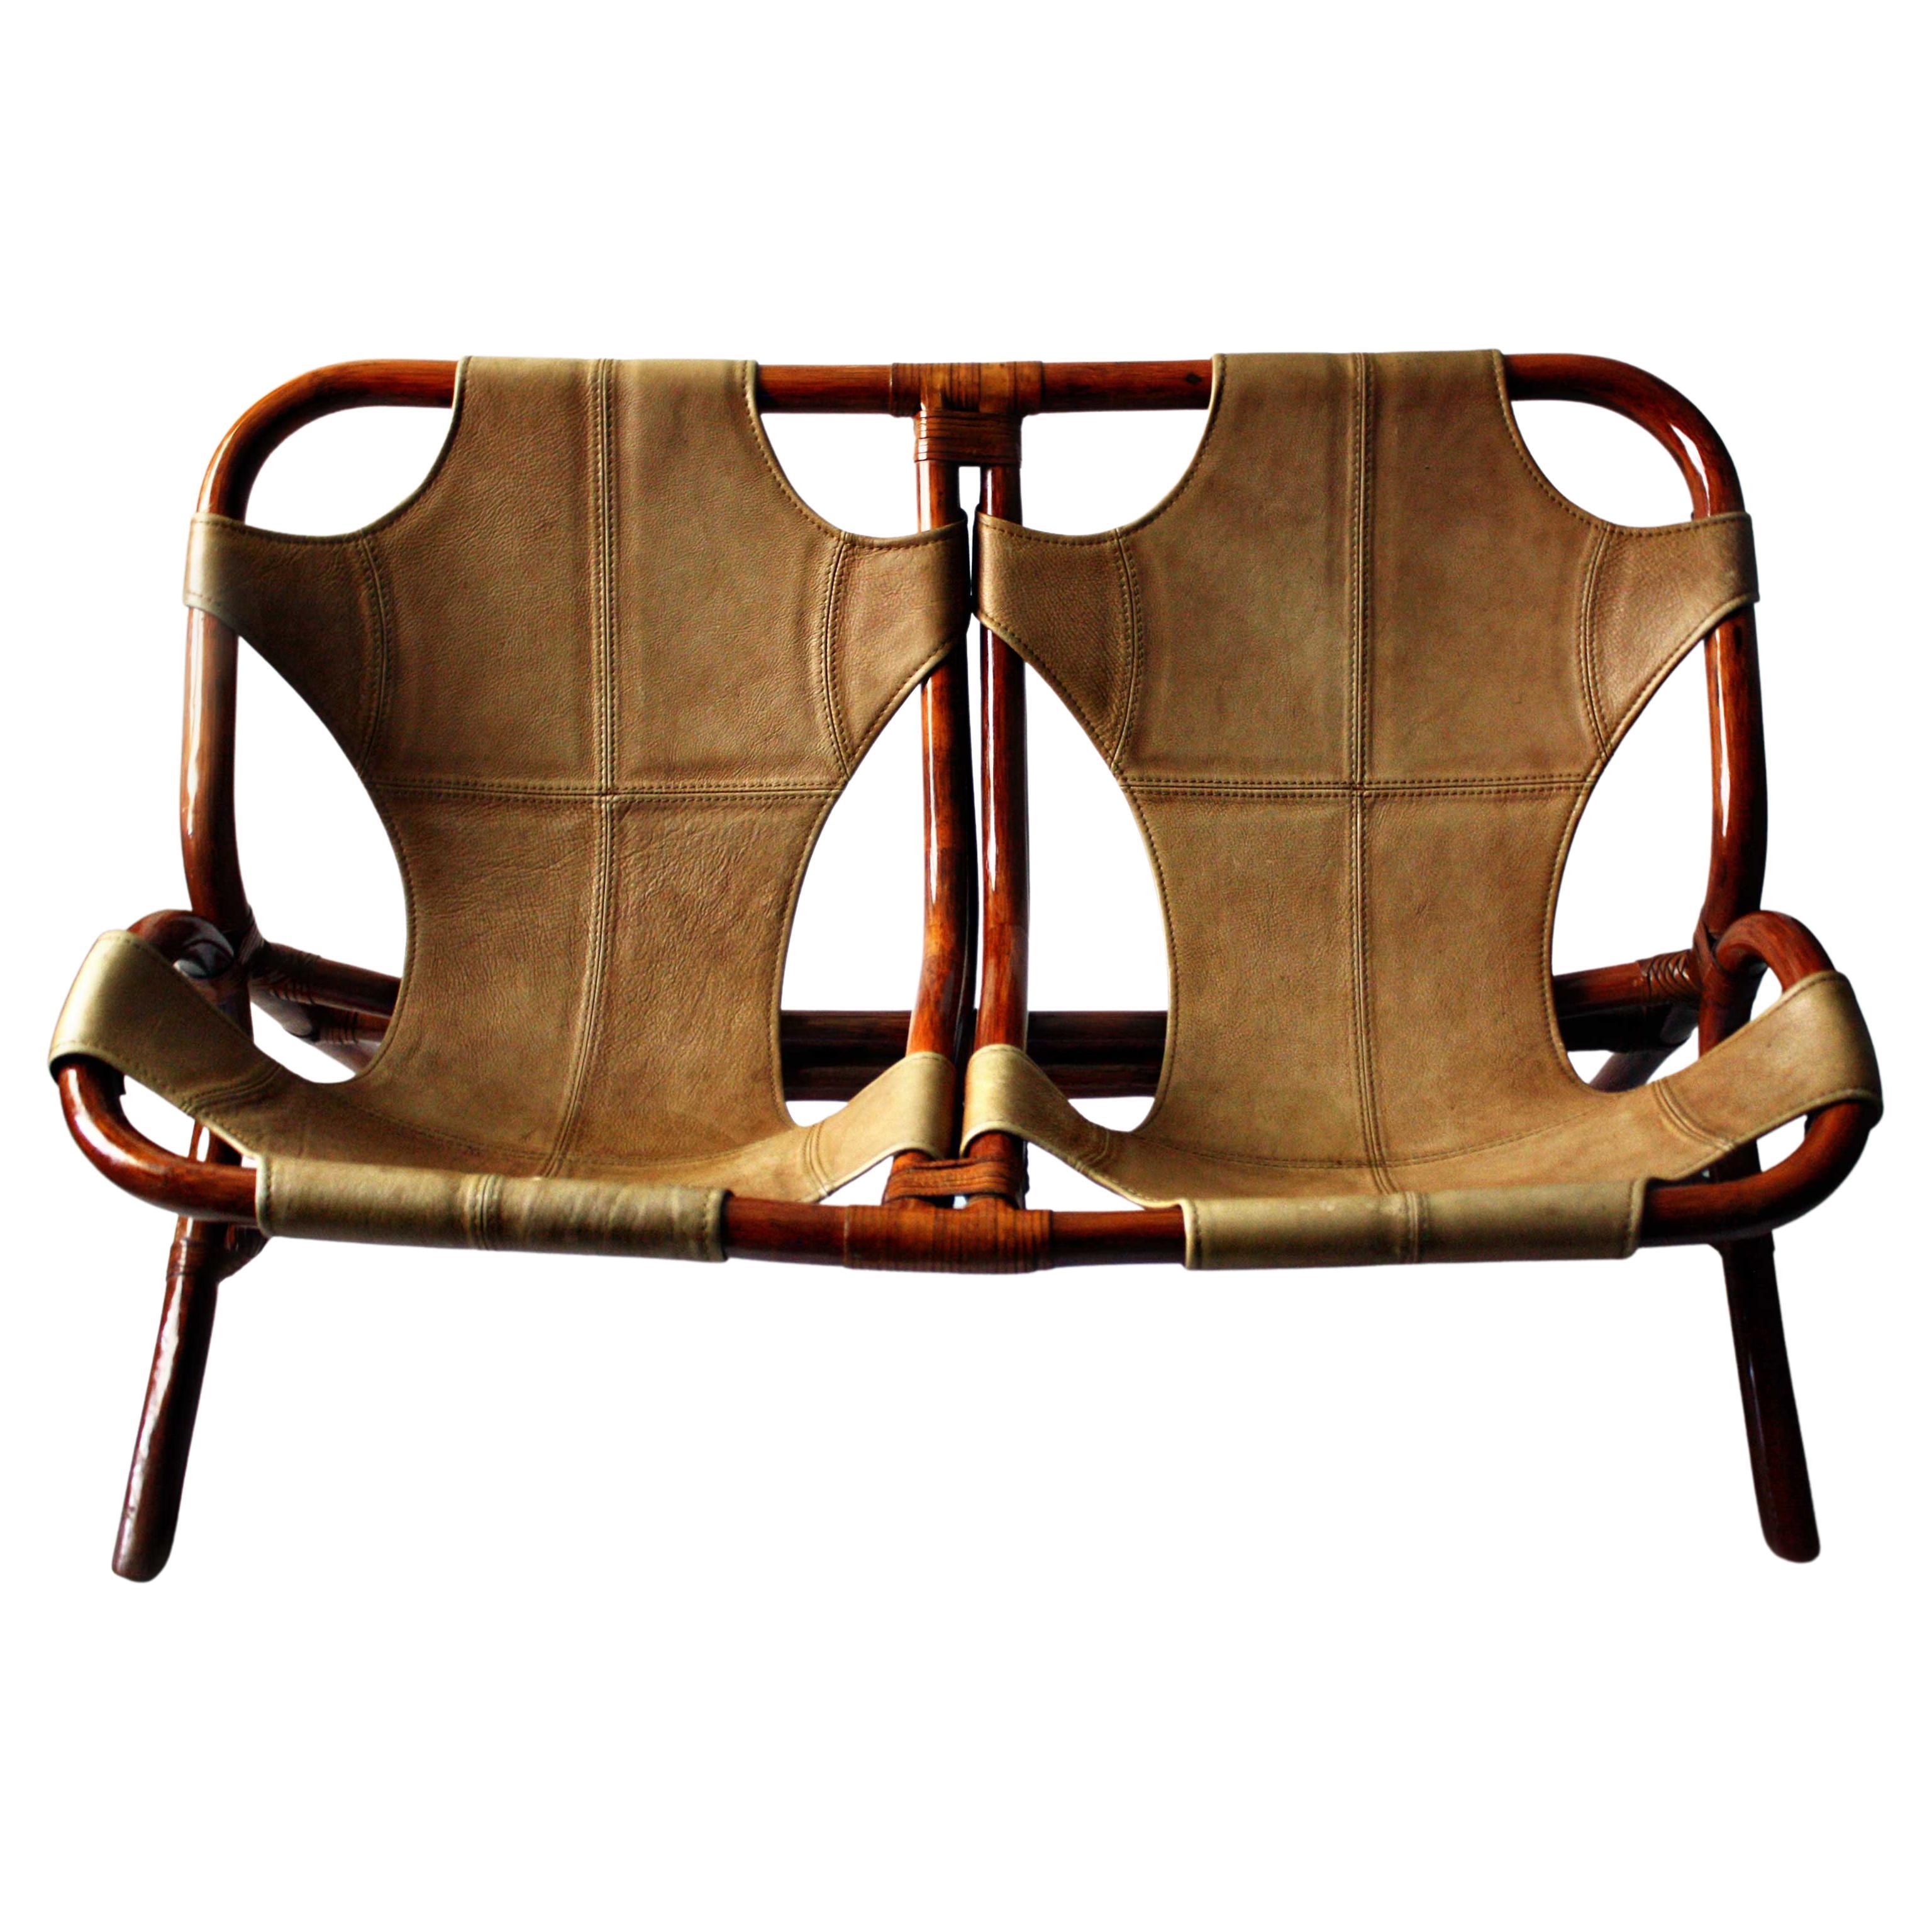 Italian Bamboo and Leather Sling Back Settee, Italy, circa 1970s